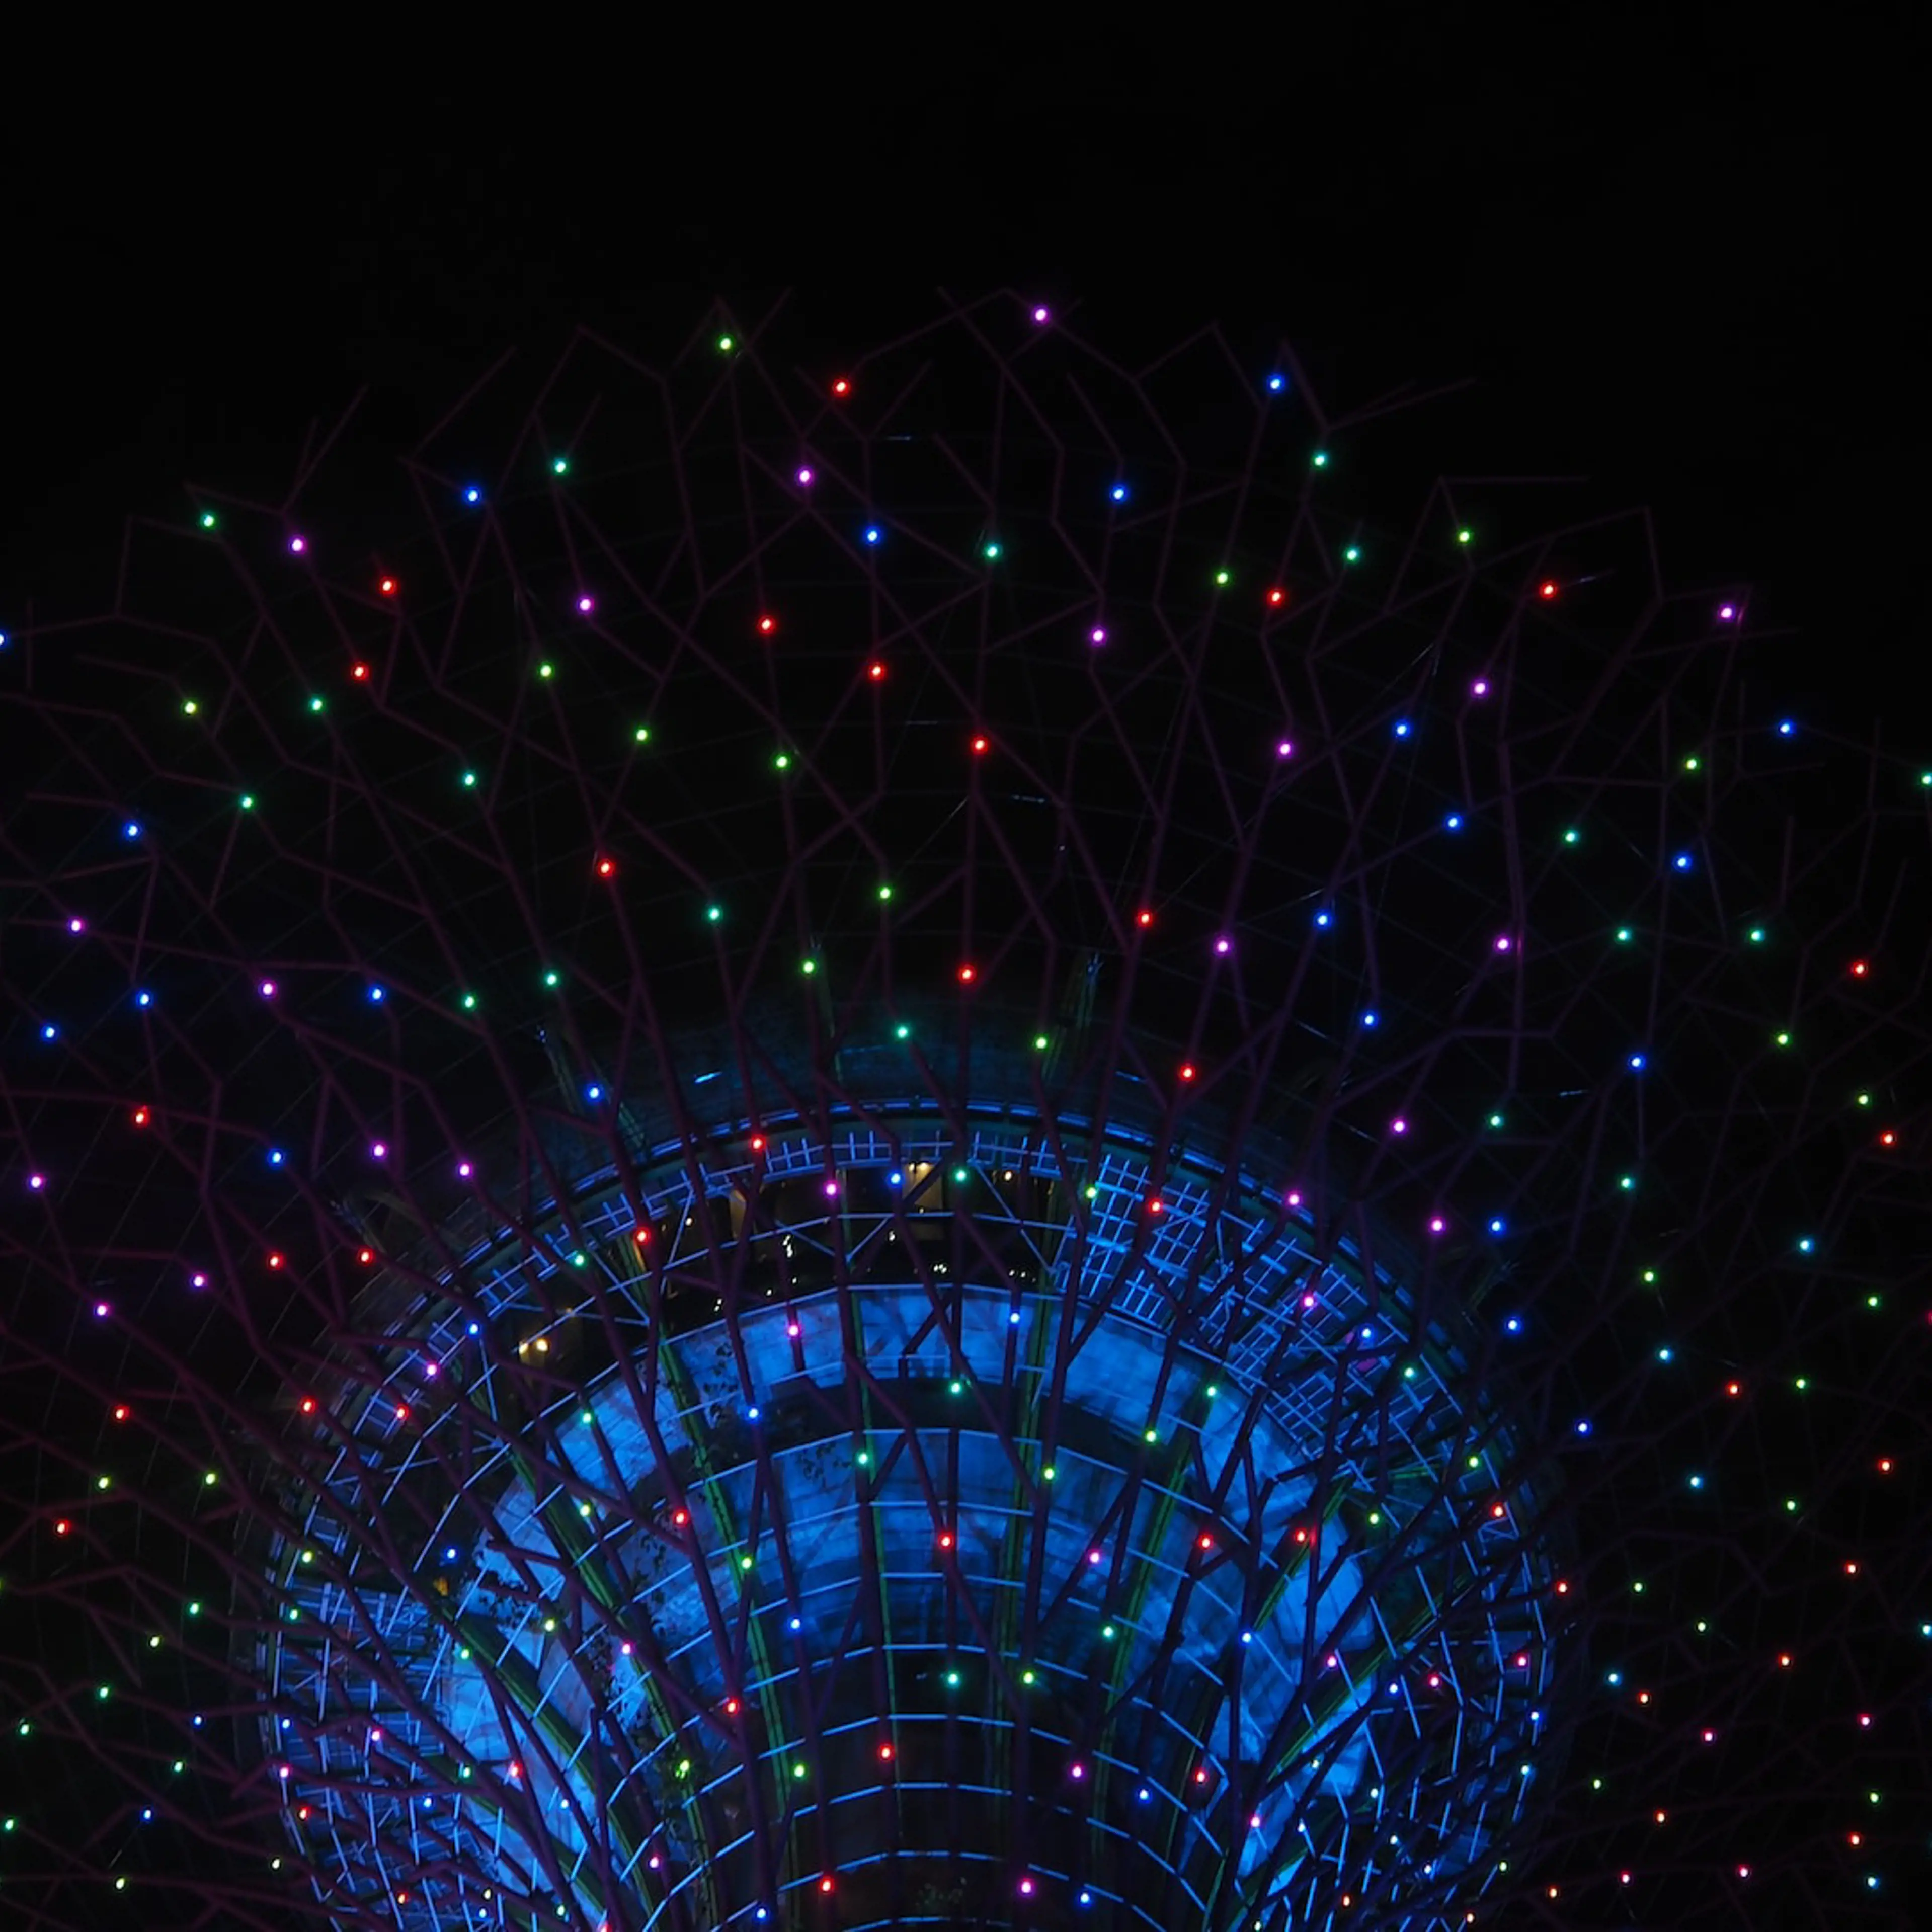 Tower in the dark seen from below with colorful lights